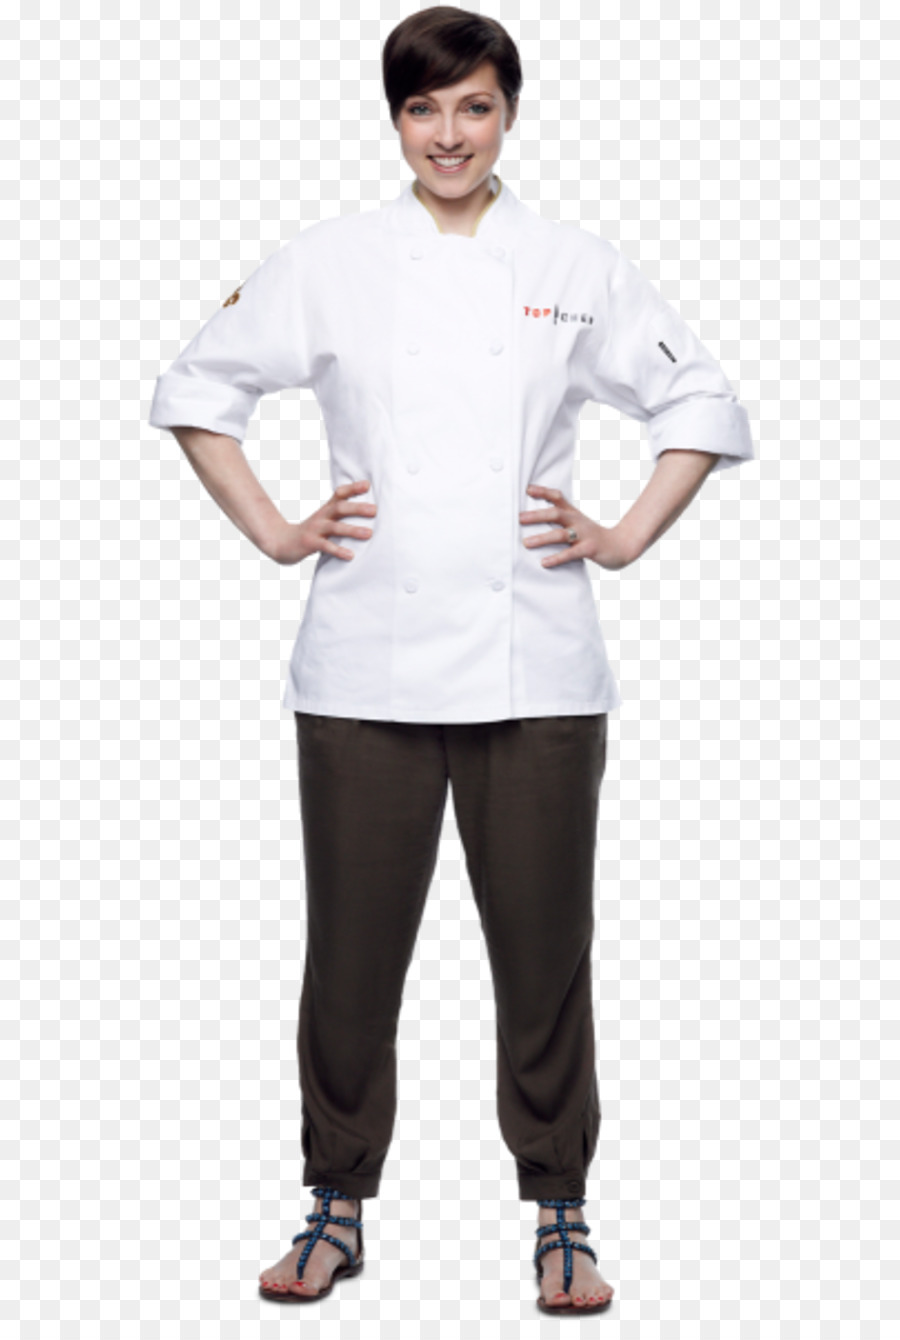 Top Chef - Stagione 11 Gail Simmons Chef uniforme - anwarchef